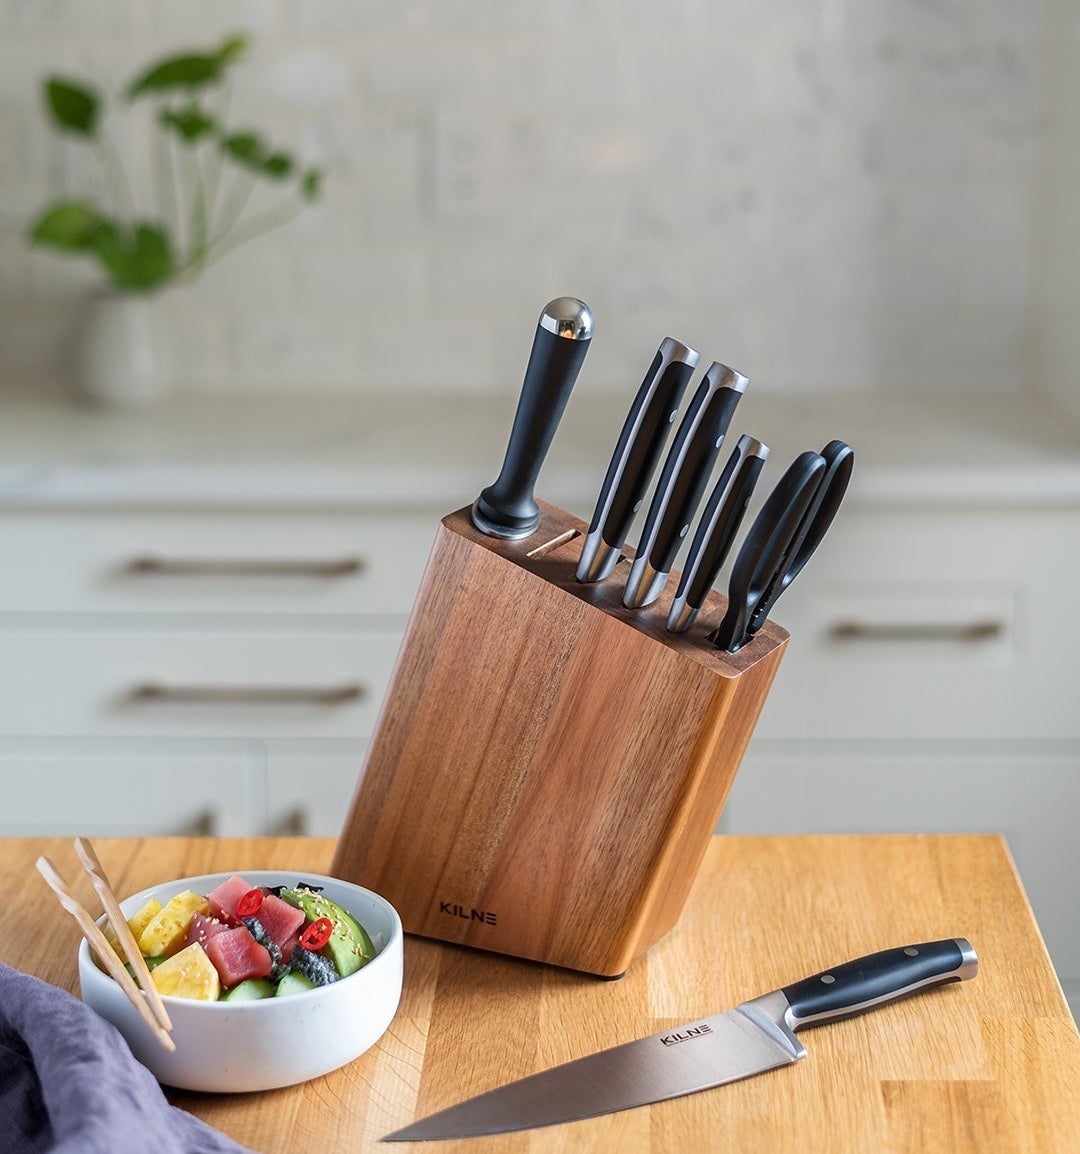 the full knife set in the wooden block